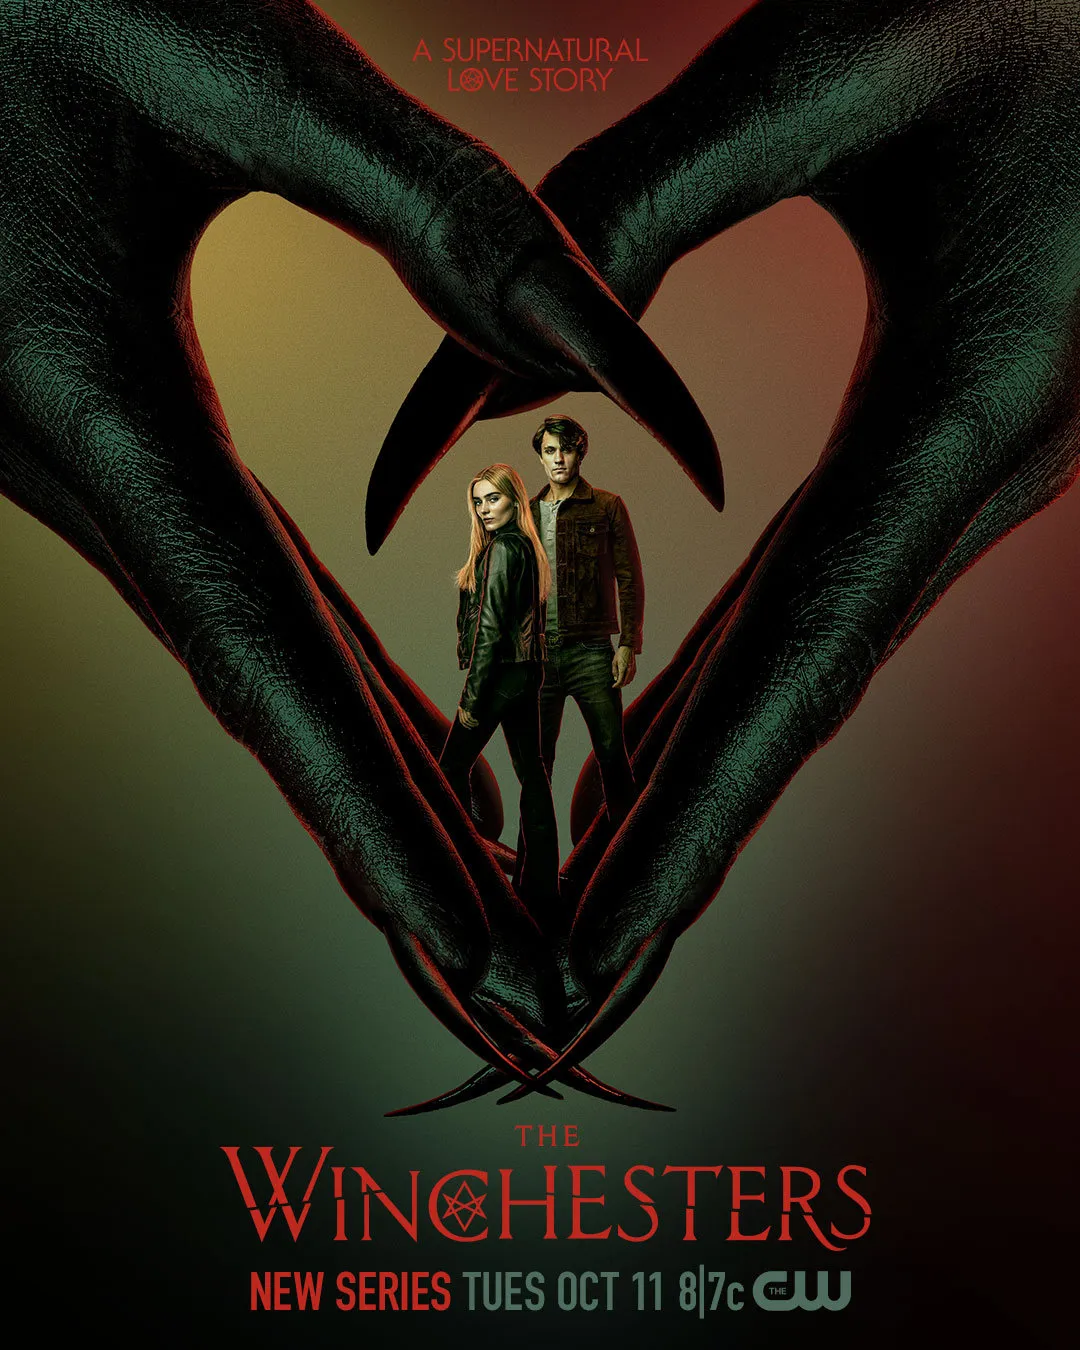 Posters for new drama 'The Winchesters', which airs on The CW October 11 | FMV6